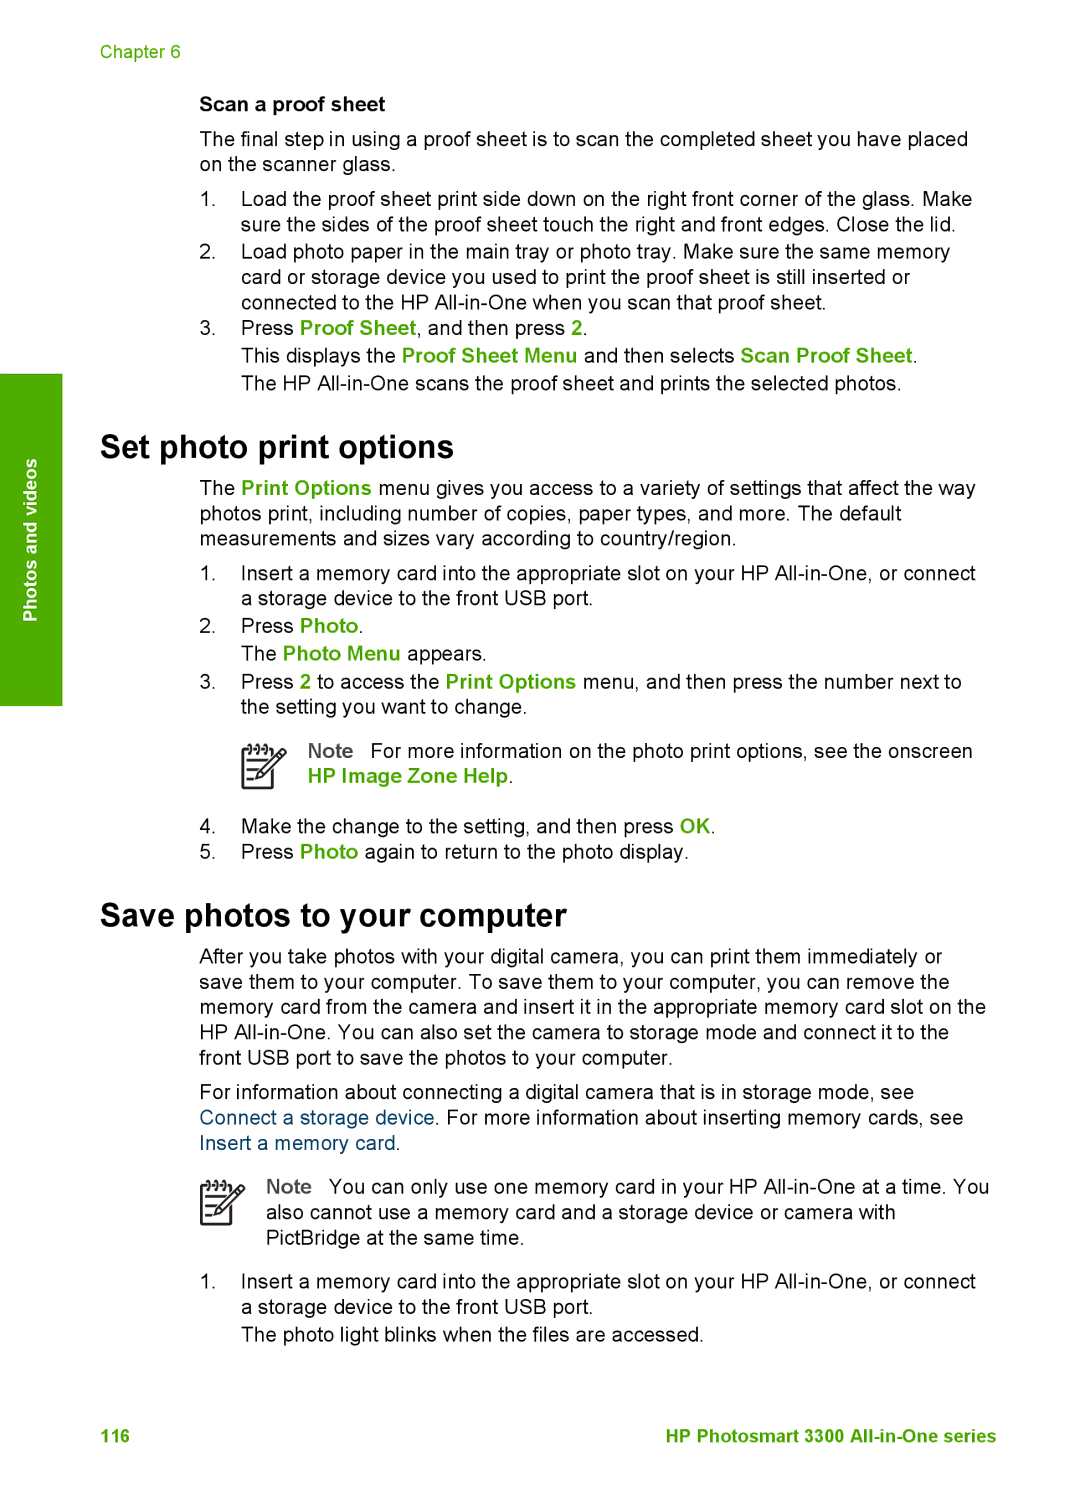 HP 3300 manual Set photo print options, Save photos to your computer, Scan a proof sheet 